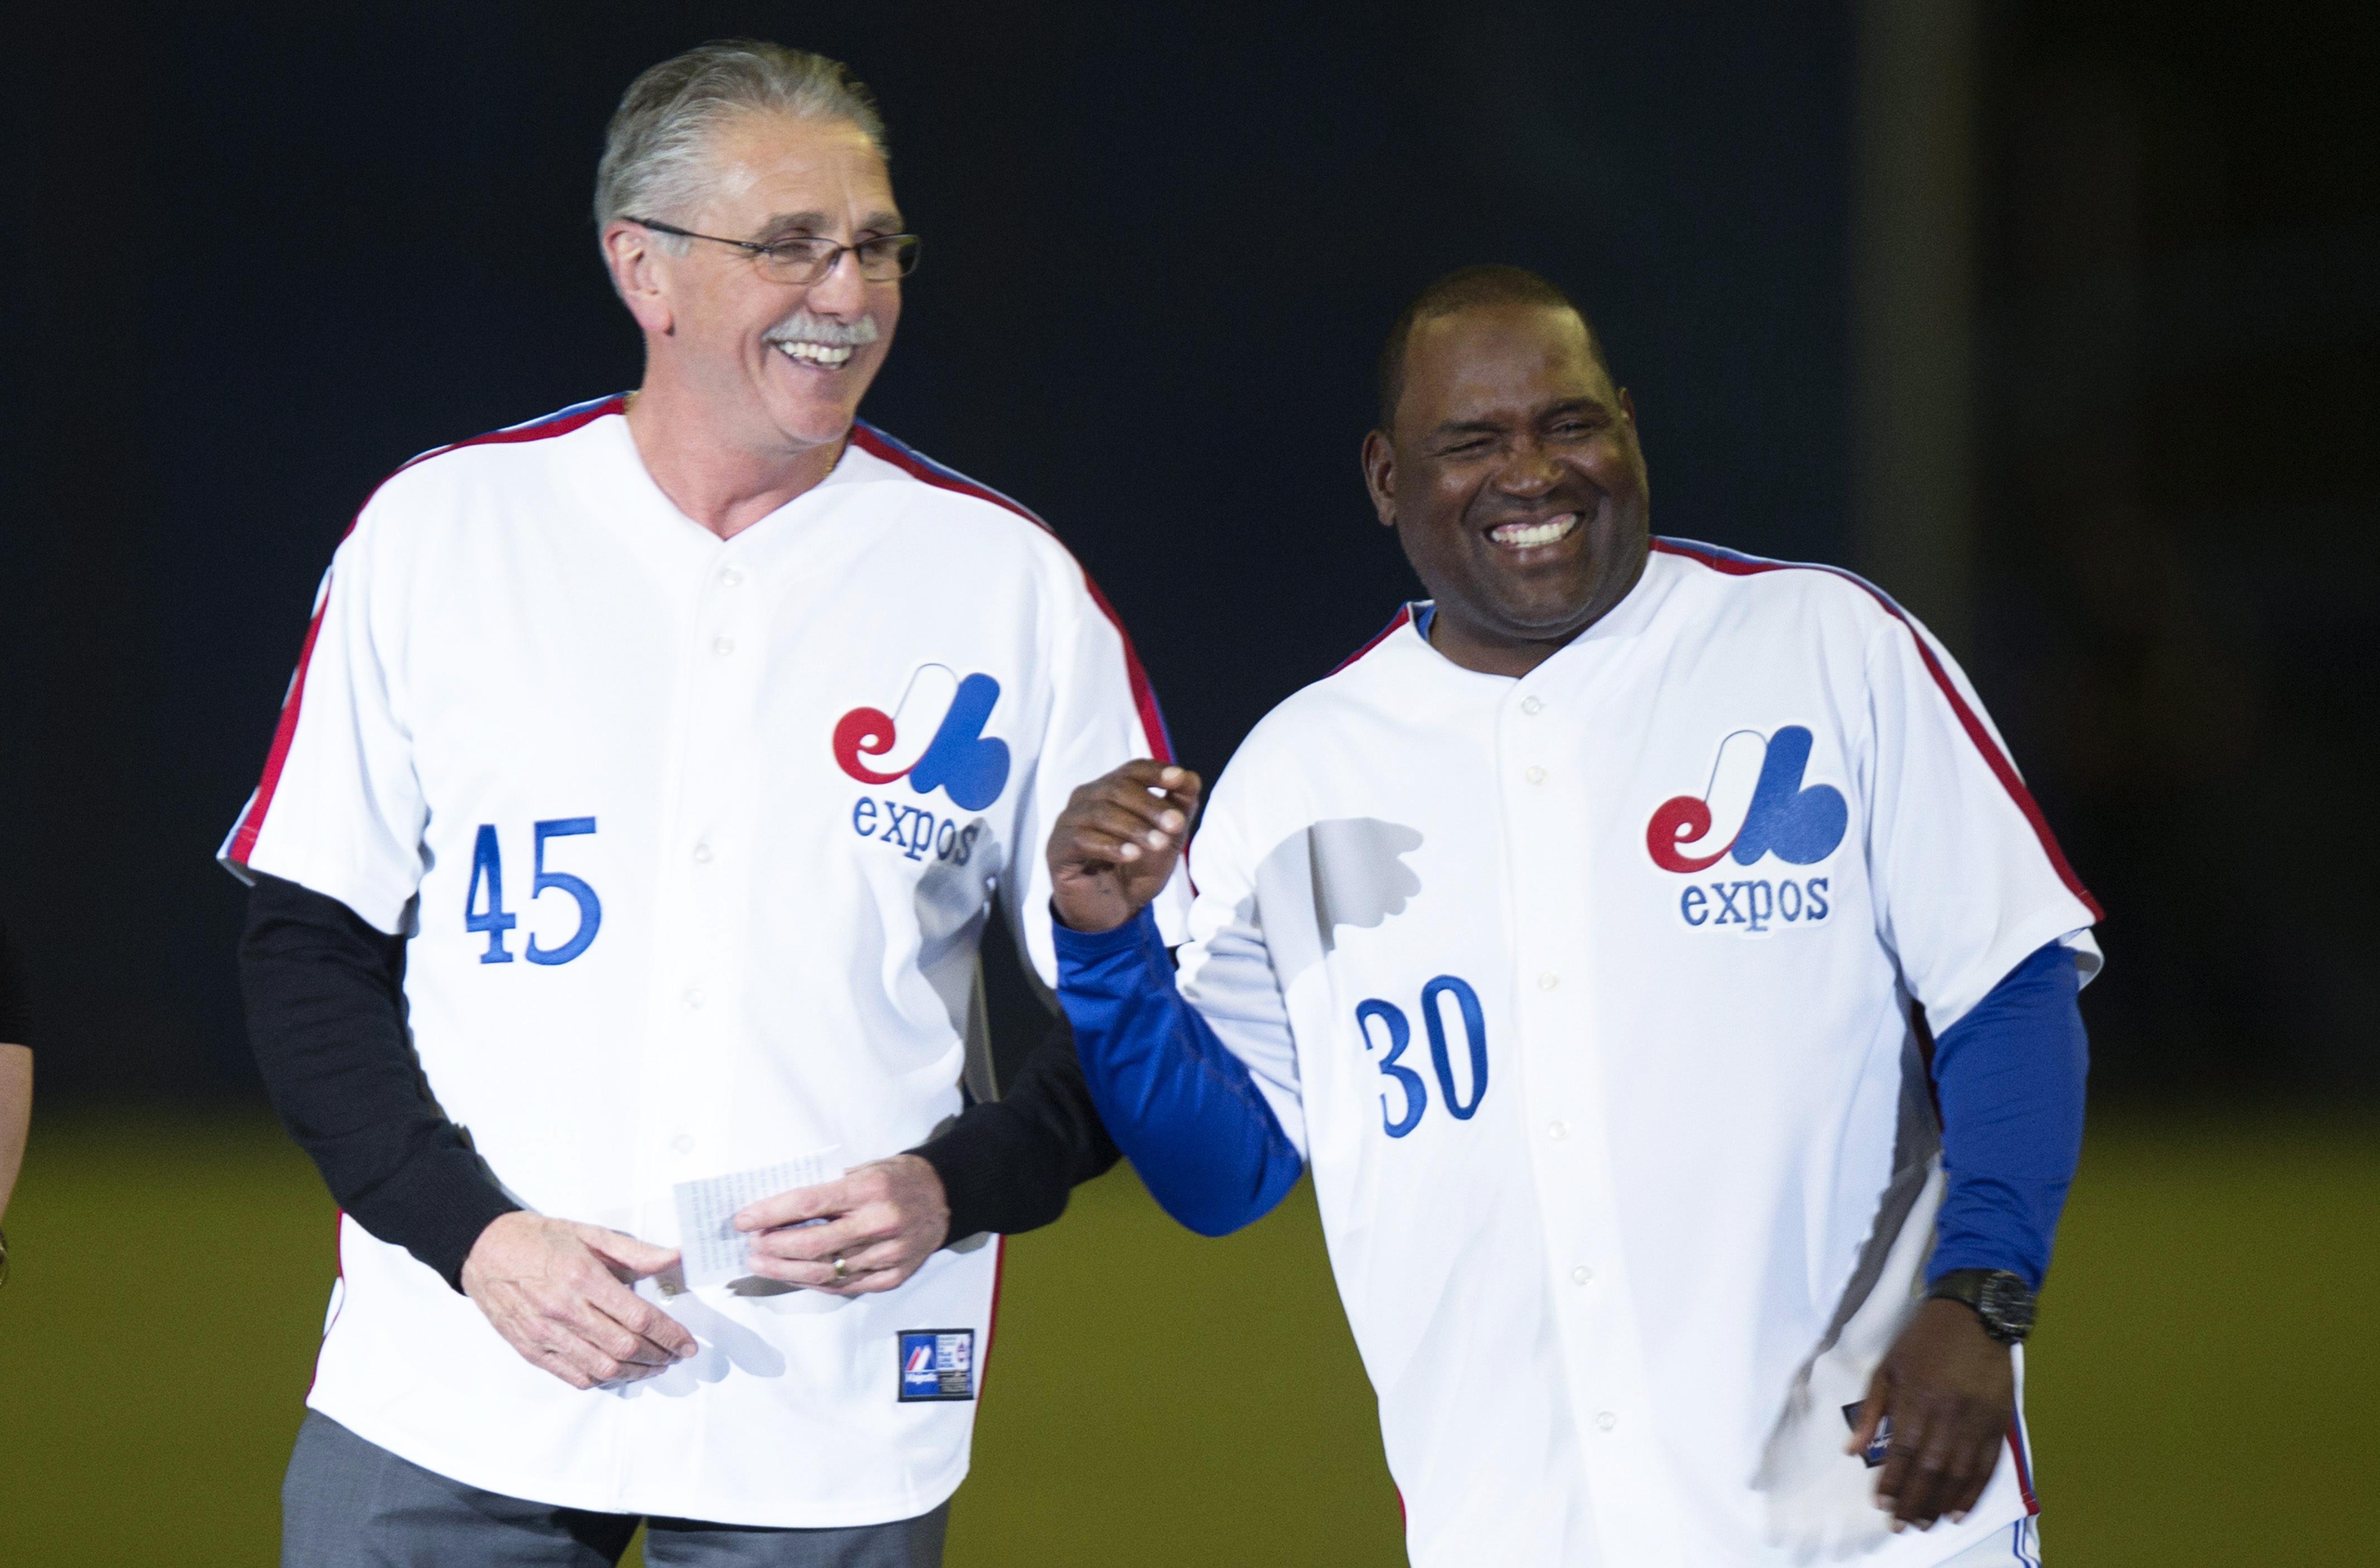 Nationals to Wear 1969 Expos Throwback Jerseys in July